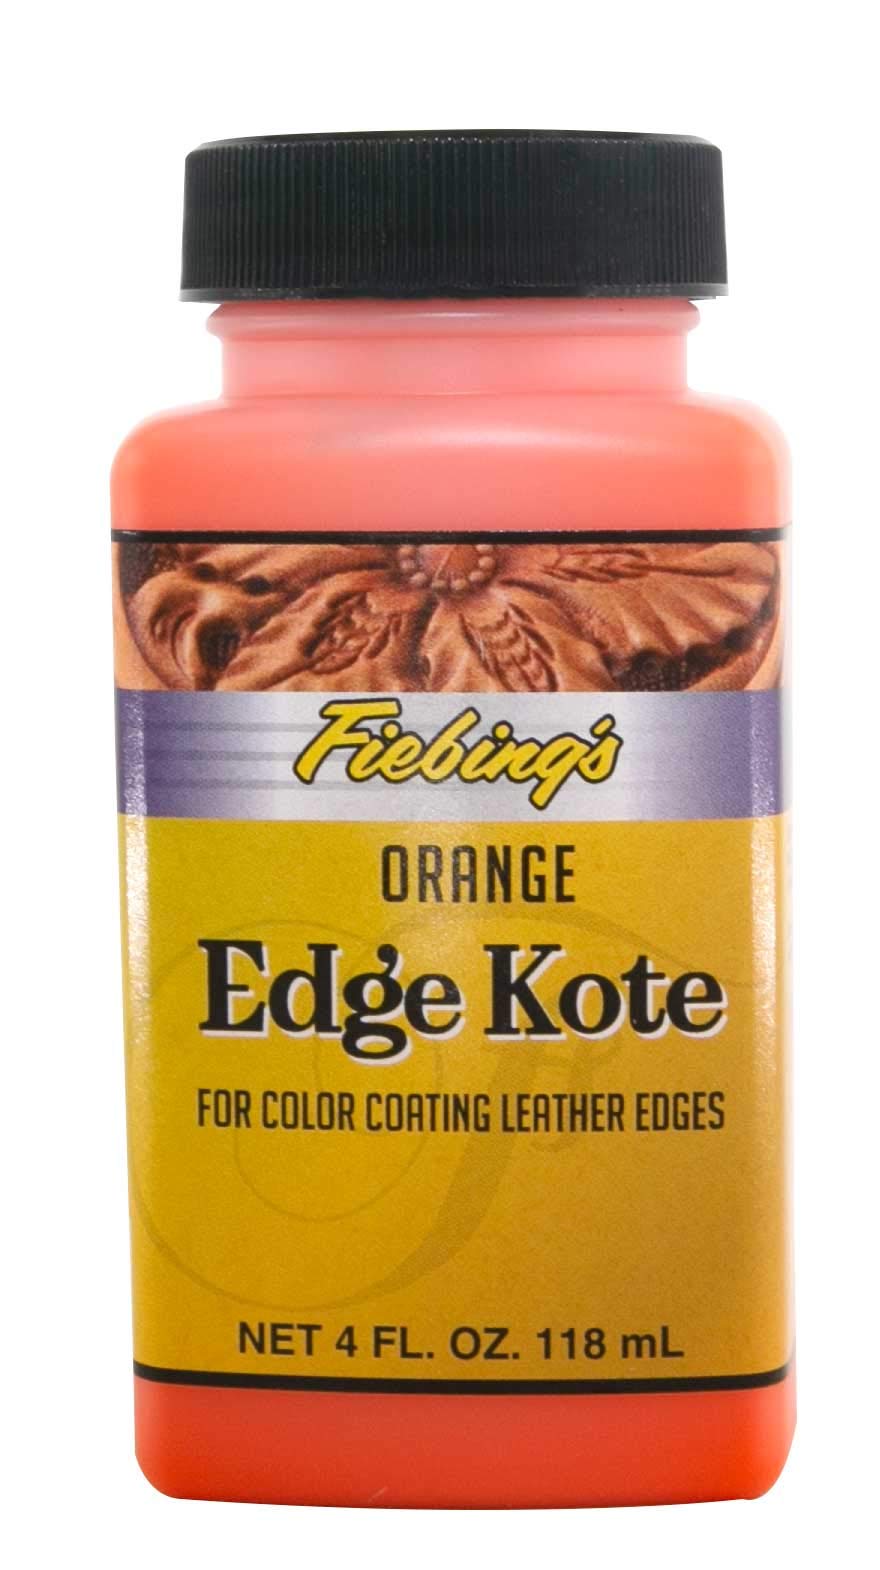 Fiebing's Edge Kote 4 Fl Oz - Orange - for Coloring Leather Edges on Purses, Bags, Shoes, Holsters, Wallets, etc